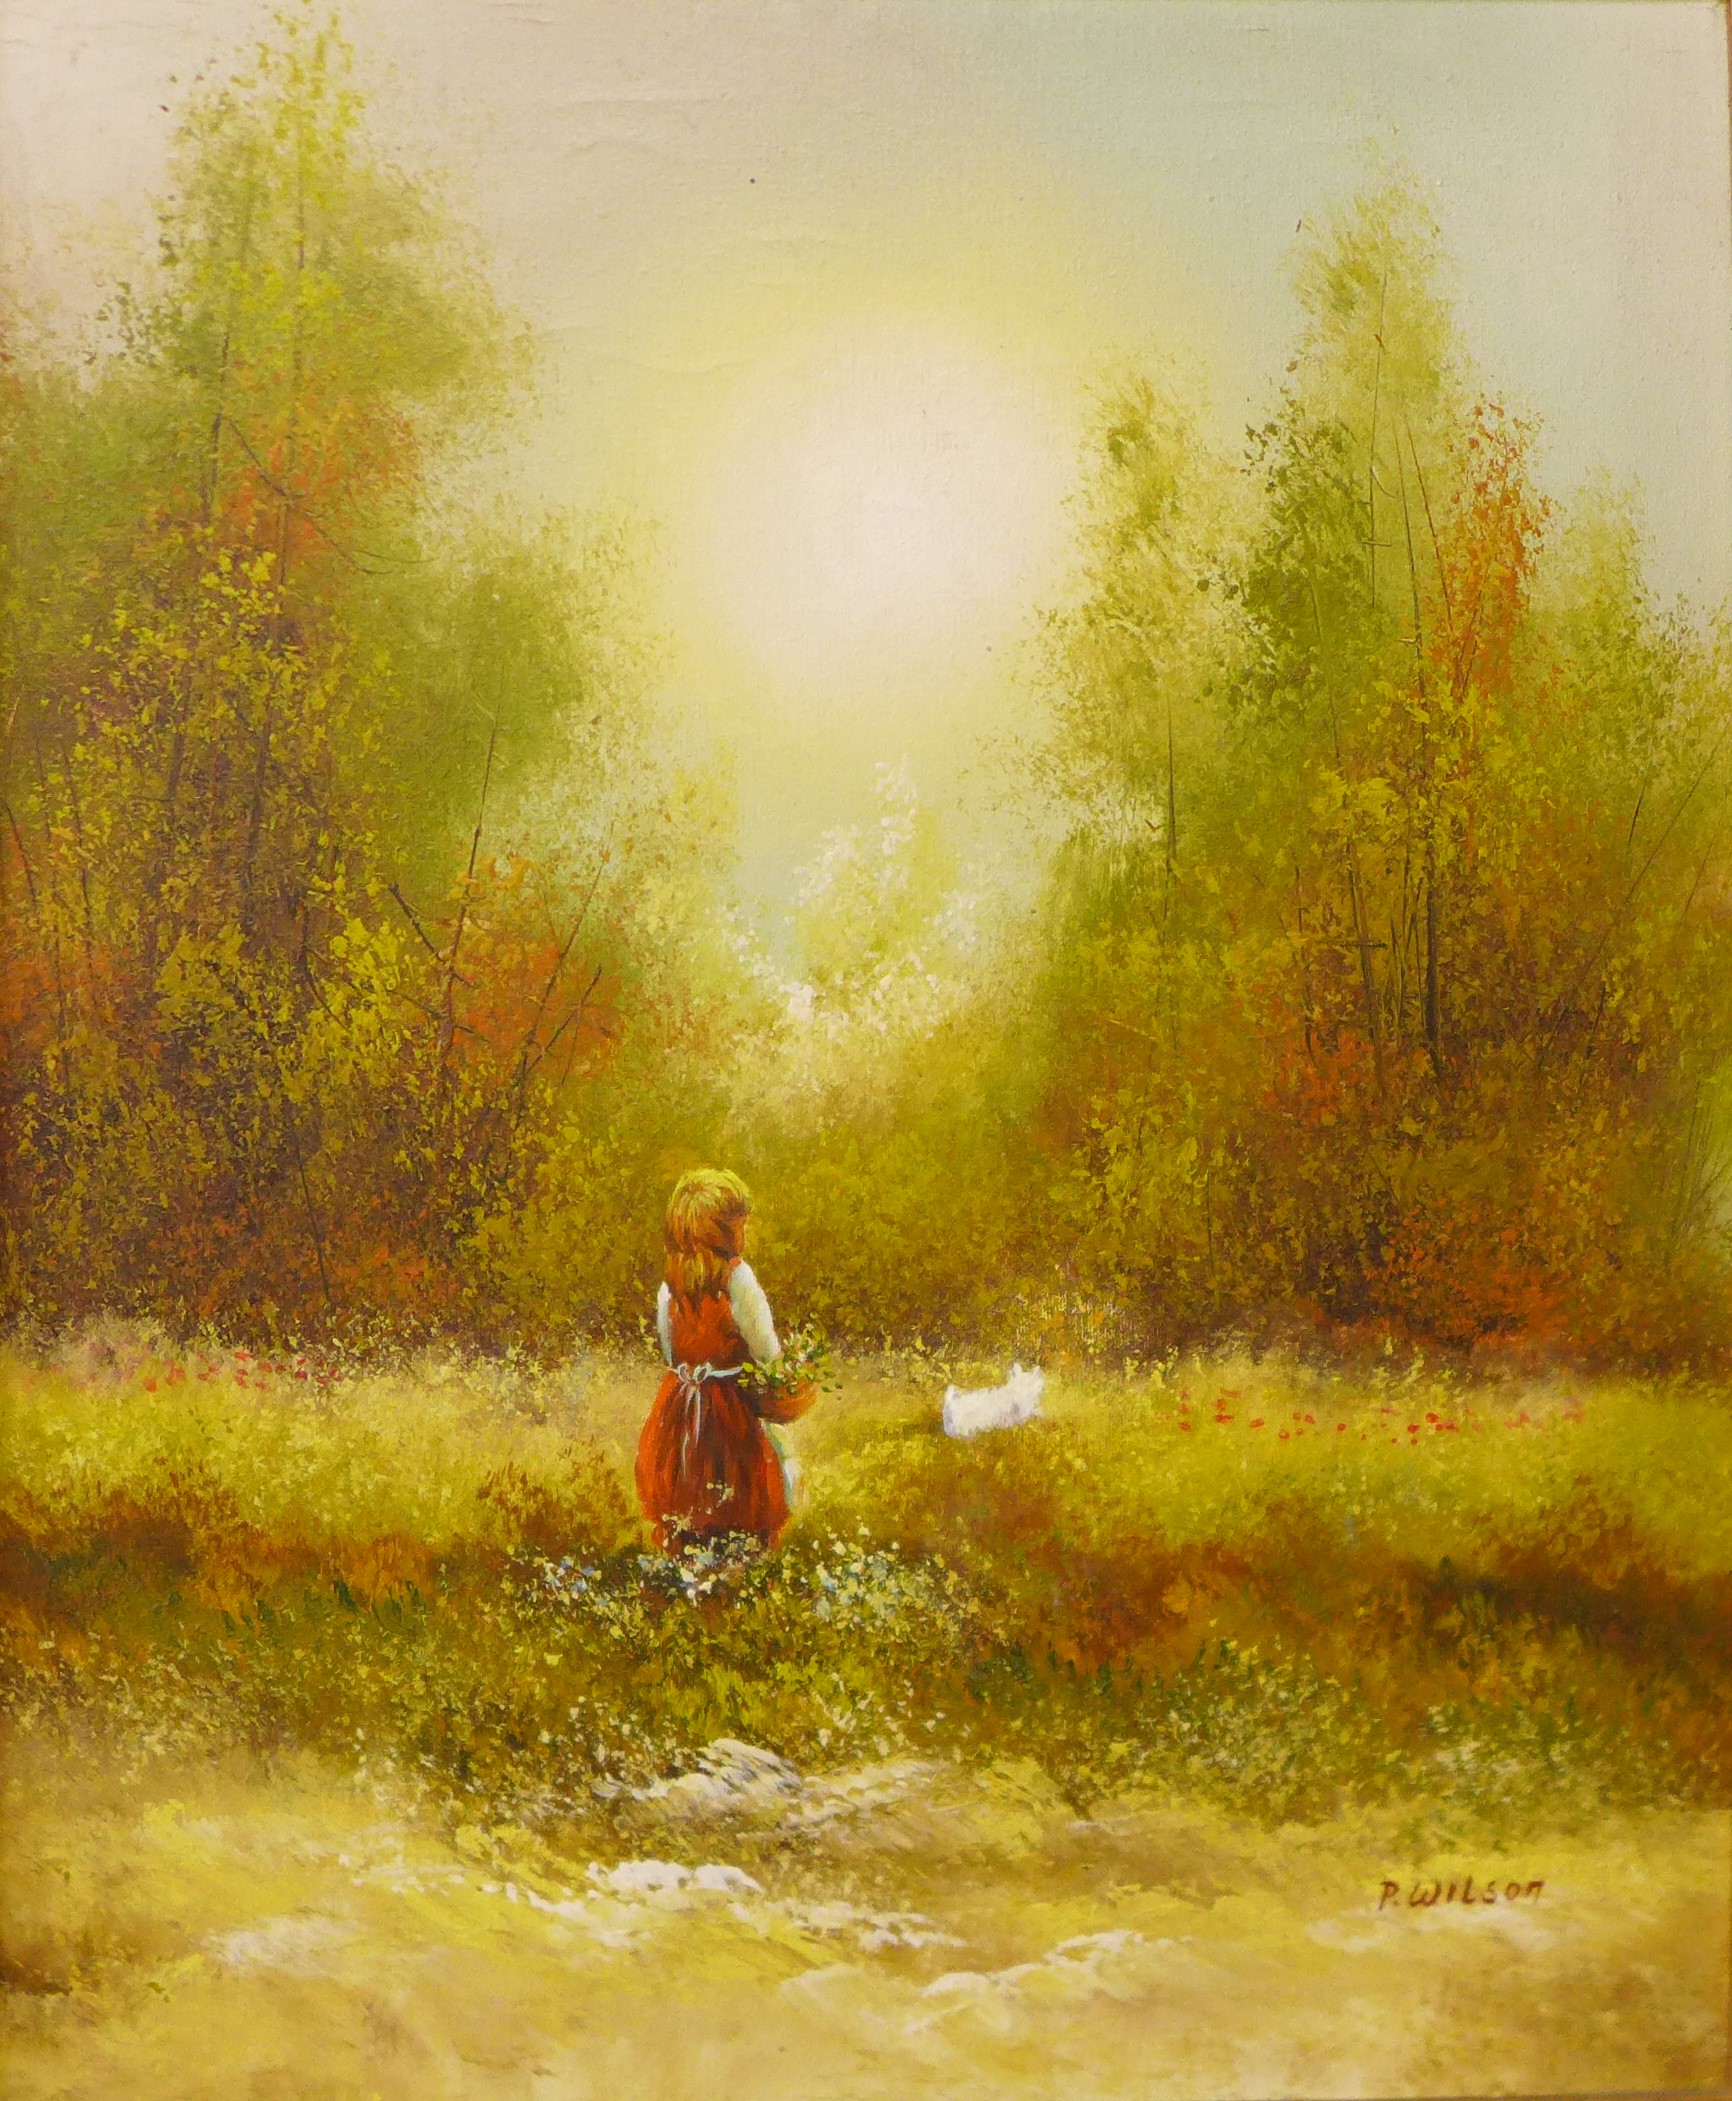 P. Wilson, landscape with girl and dog in a field, oil on canvas, 60 x 49cms, framed